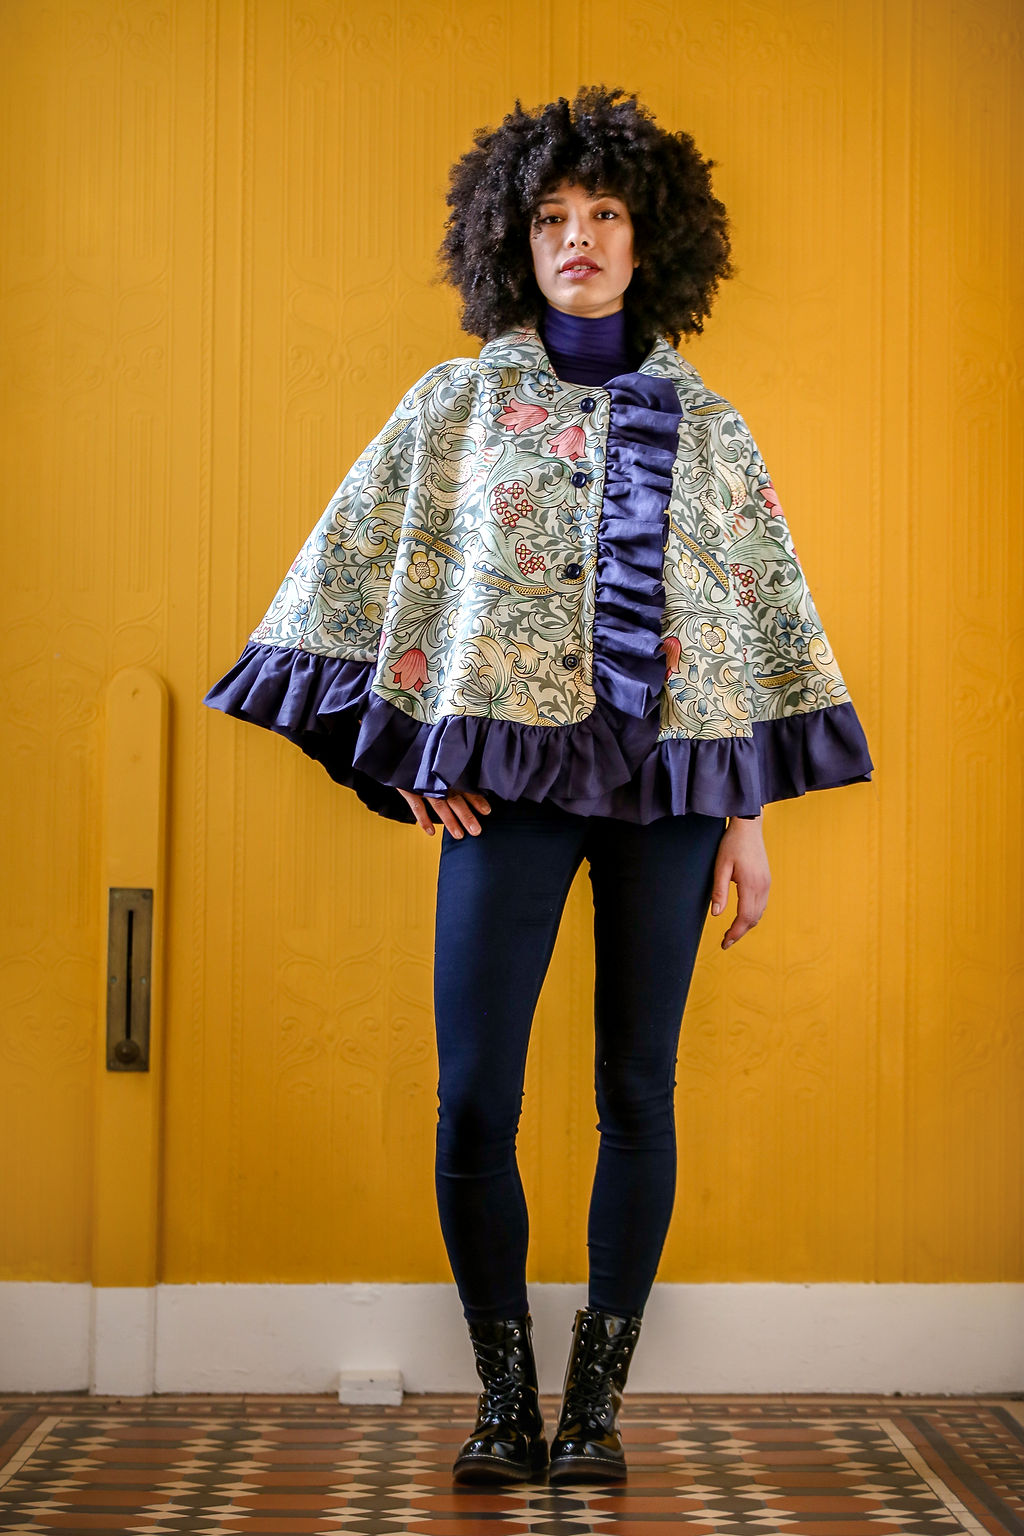 Woman wearing the Stornoway Cape sewing pattern by Greyfriars and Grace. A cape pattern made in mid-heavy weight wool, cotton, linen or cotton/linen blend fabric for cape and cotton lining, featuring a front button closure, collar and ruffle hem.